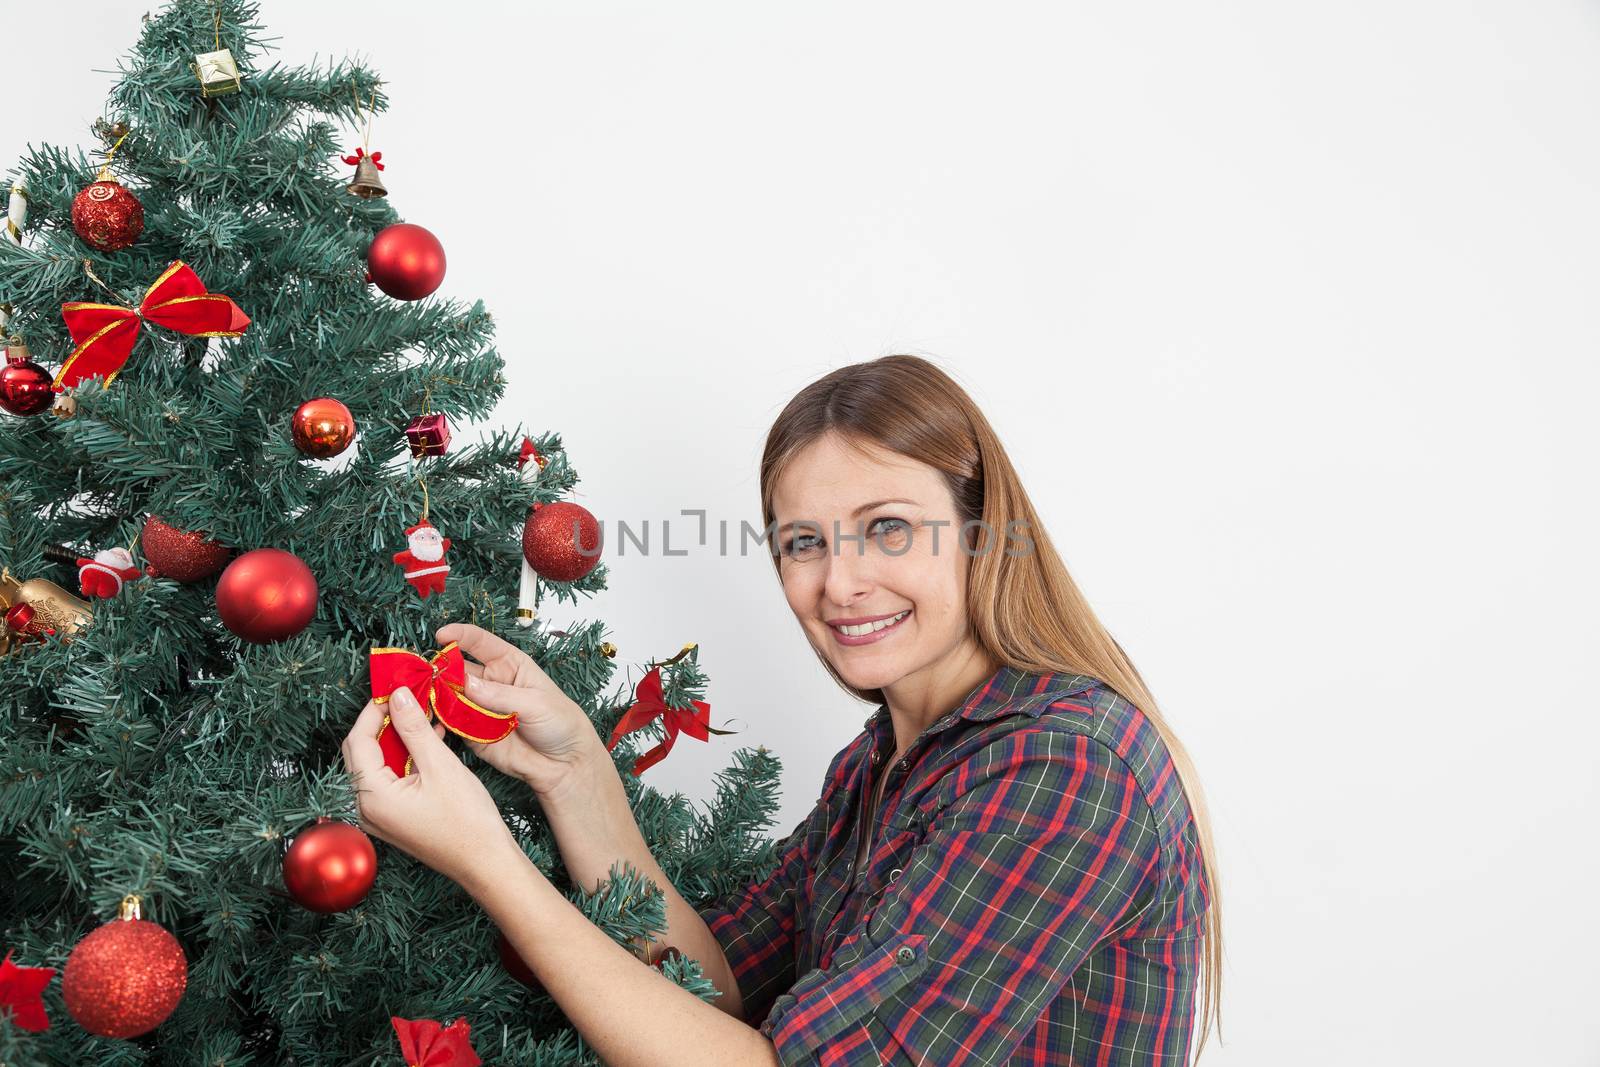 30-35, arms, background, balls, beautiful, bow, camera, casual, caucasian, celebration, christmas, cute, december, decorating, decoration, decorative, enjoying, female, festive, fingers, fun, girl, gorgeous, green, hand, hands, happiness, happy, holding, holiday, home, human, joy, lady, look, looking, merry, model, nice, old, one, people, person, portrait, positive, pretty, horizontal, property, red, releases, ribbon, season, smile, smiling, tree, white, winter, woman, x-mas, xmas, years, young